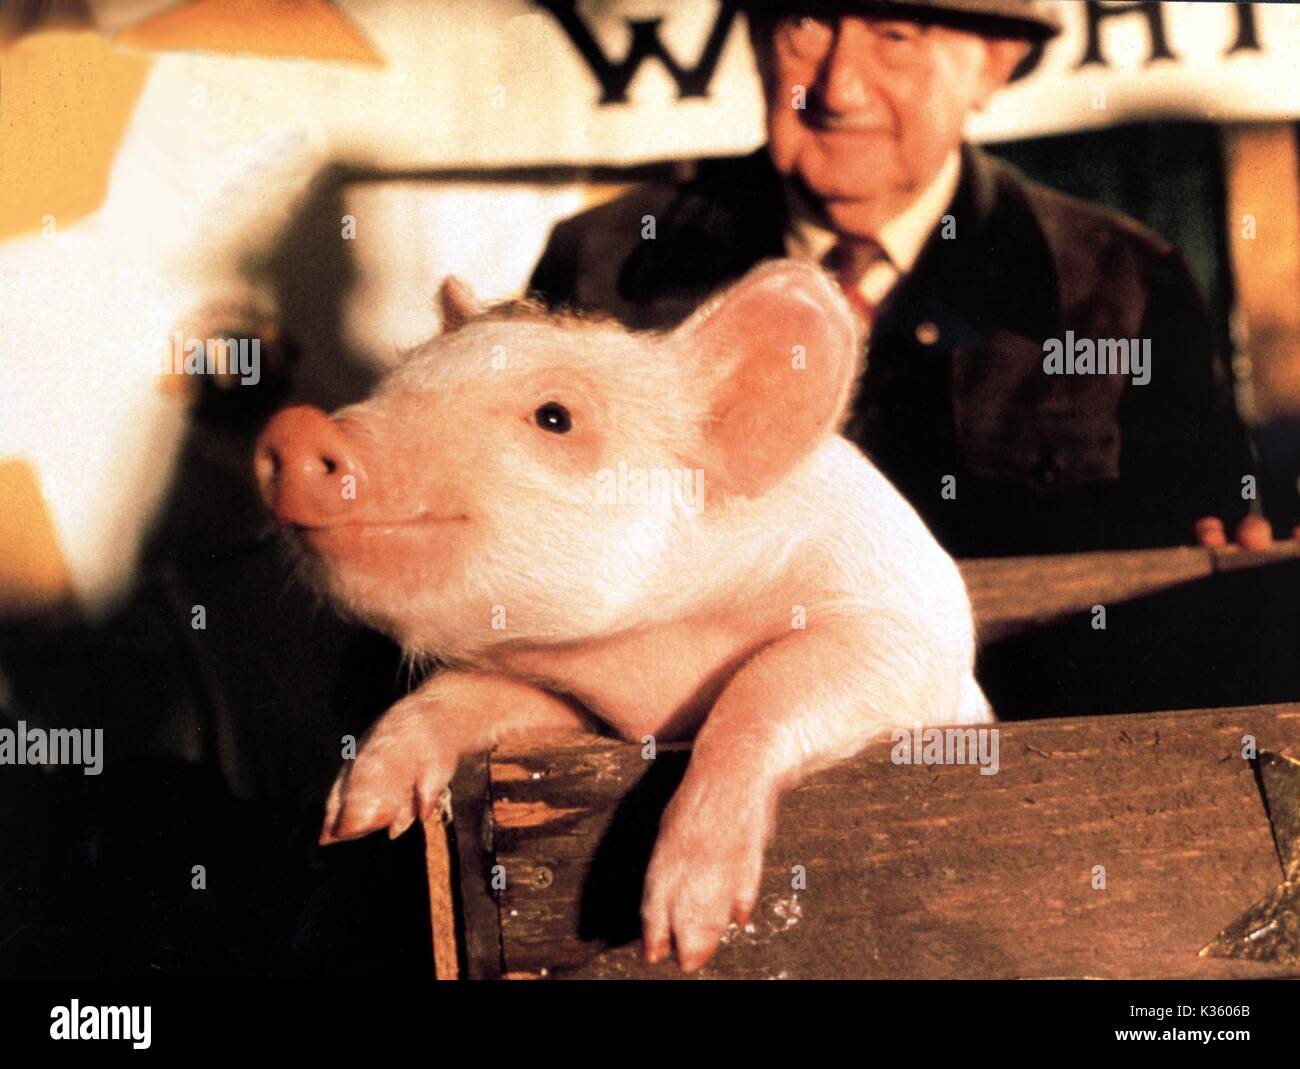 BABE THE GALLANT PIG      Date: 1995 Stock Photo